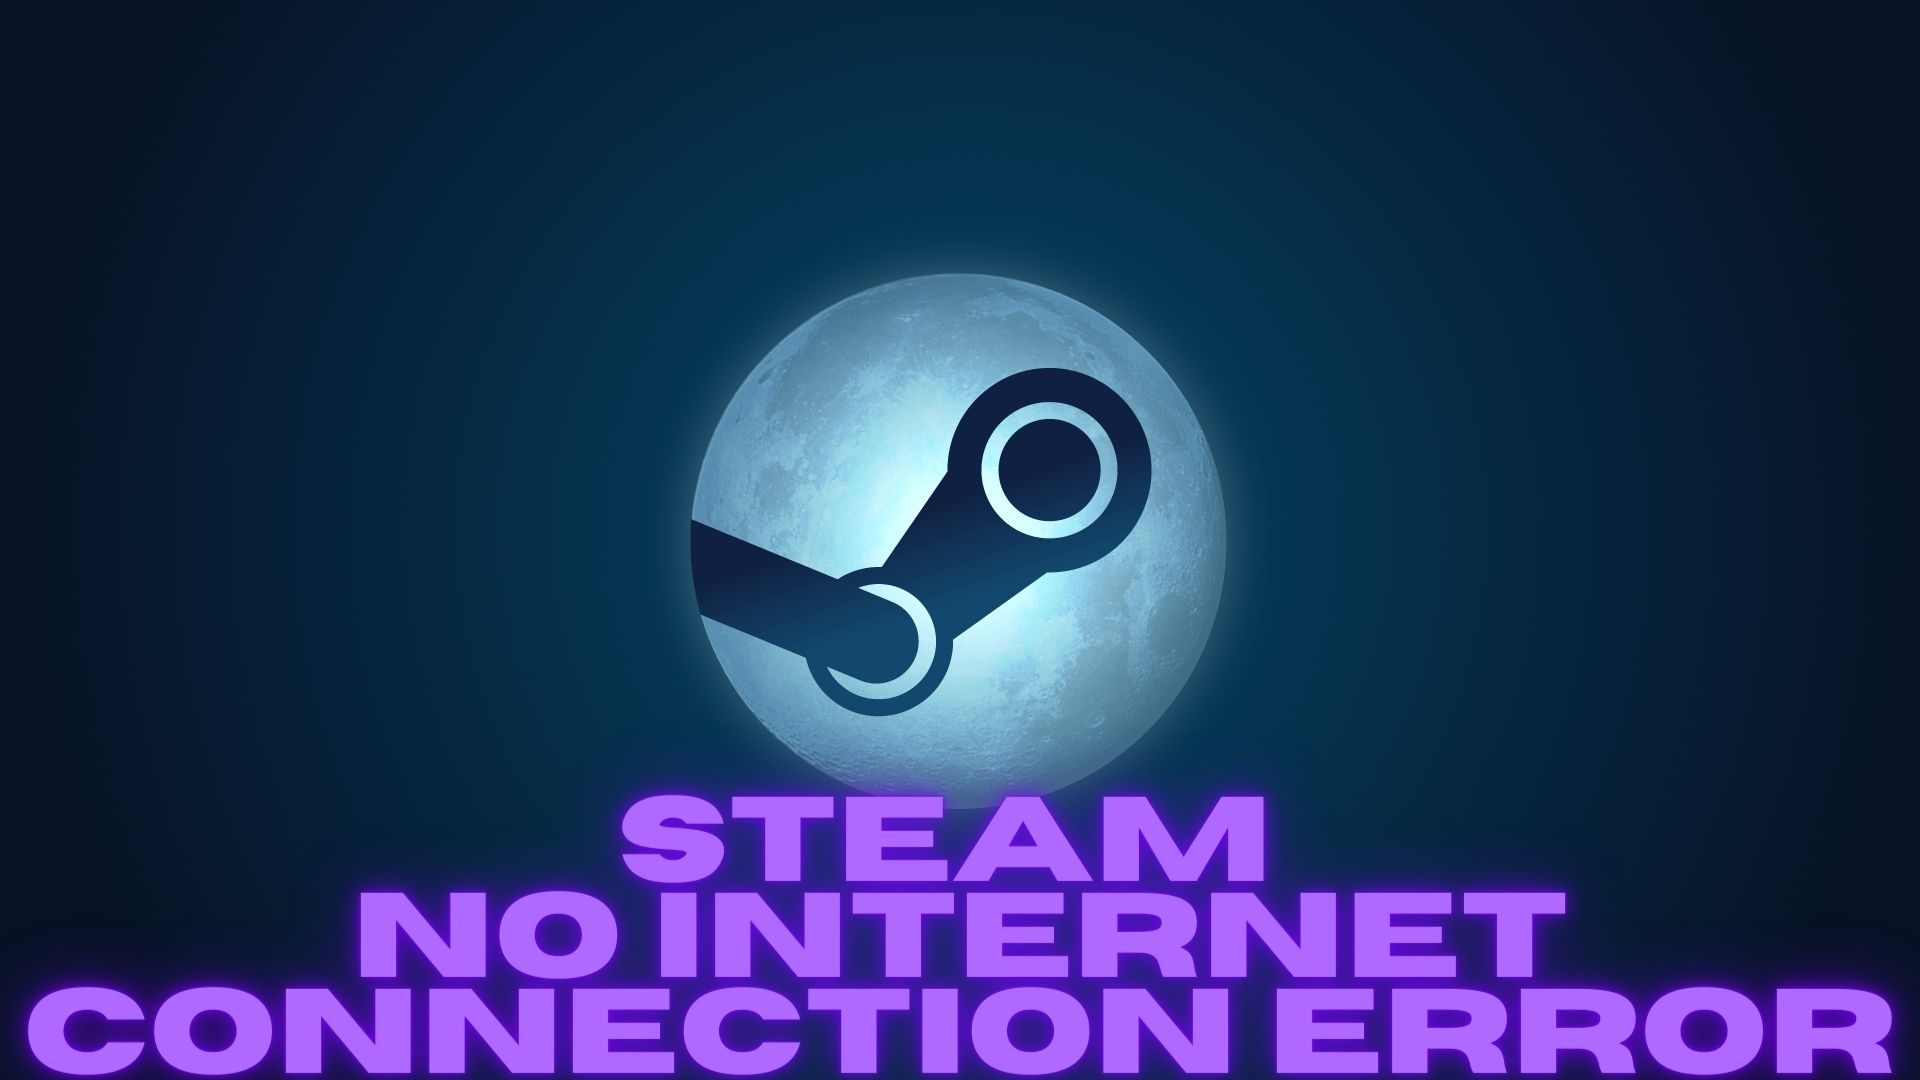 How To Fix Steam 'No Connection' Error? [Simple Method